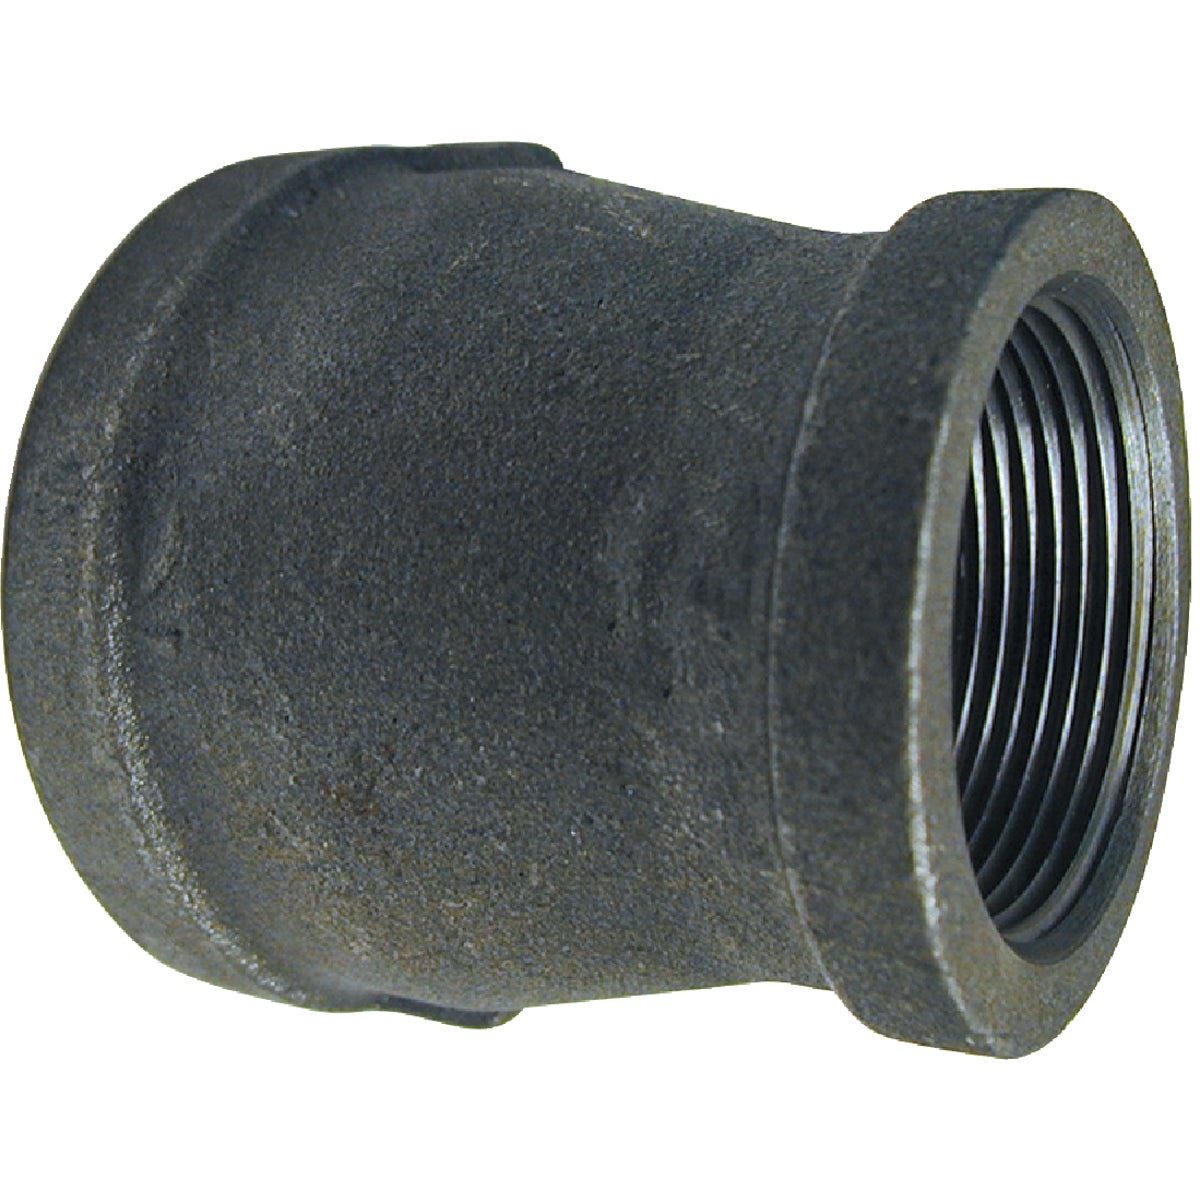 Southland 1-1/4 In. x 1/2 In. Malleable Black Iron Reducing Coupling